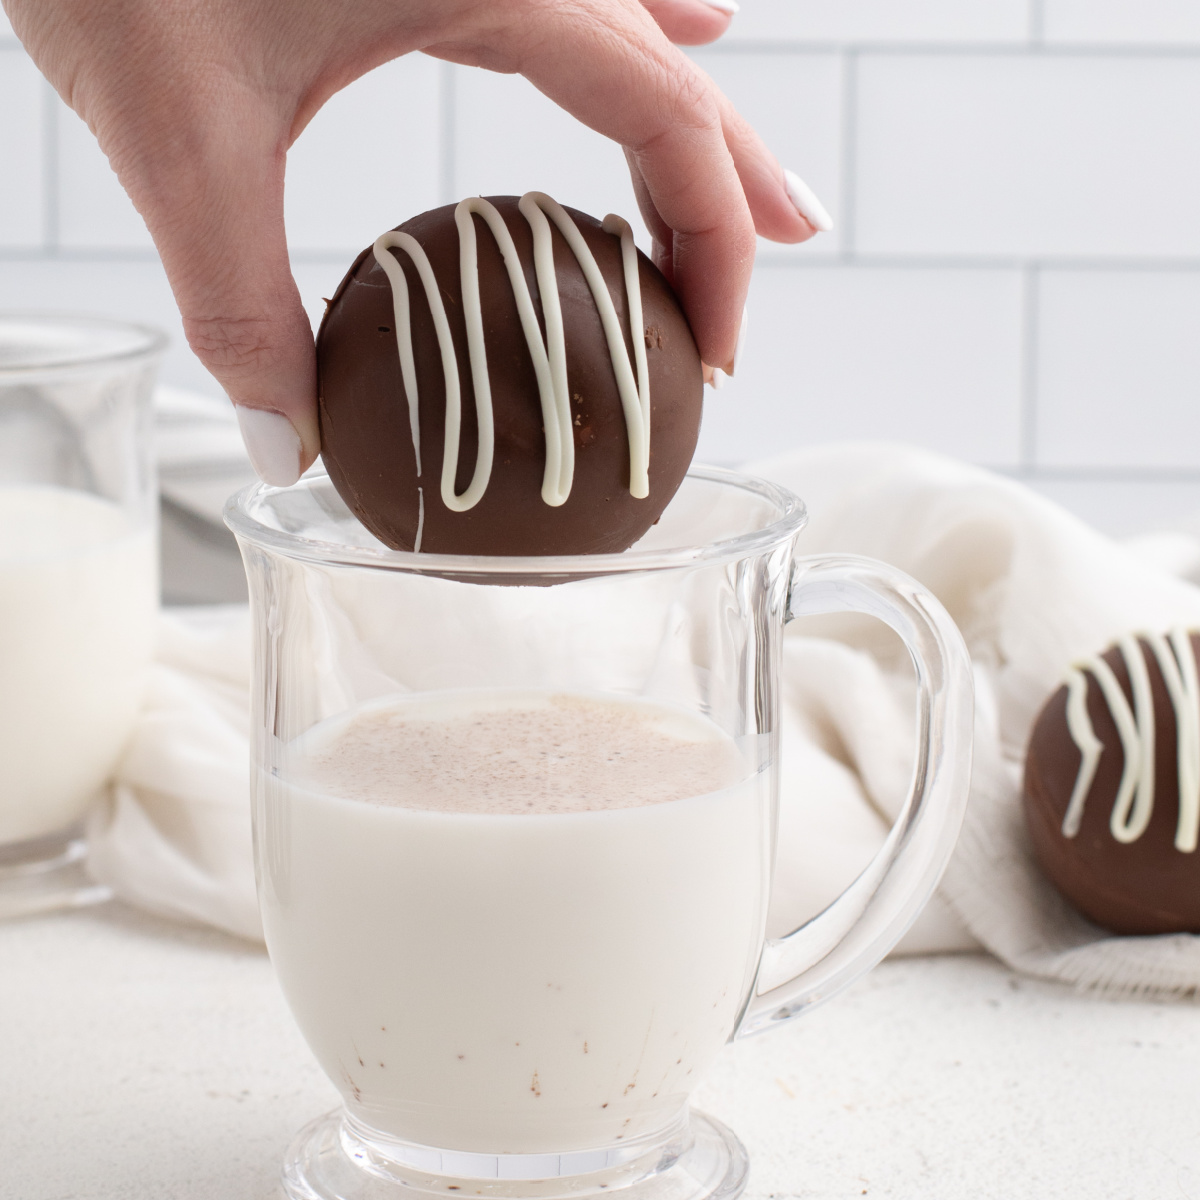 Hot chocolate bomb being placed into a clear glass of white milk